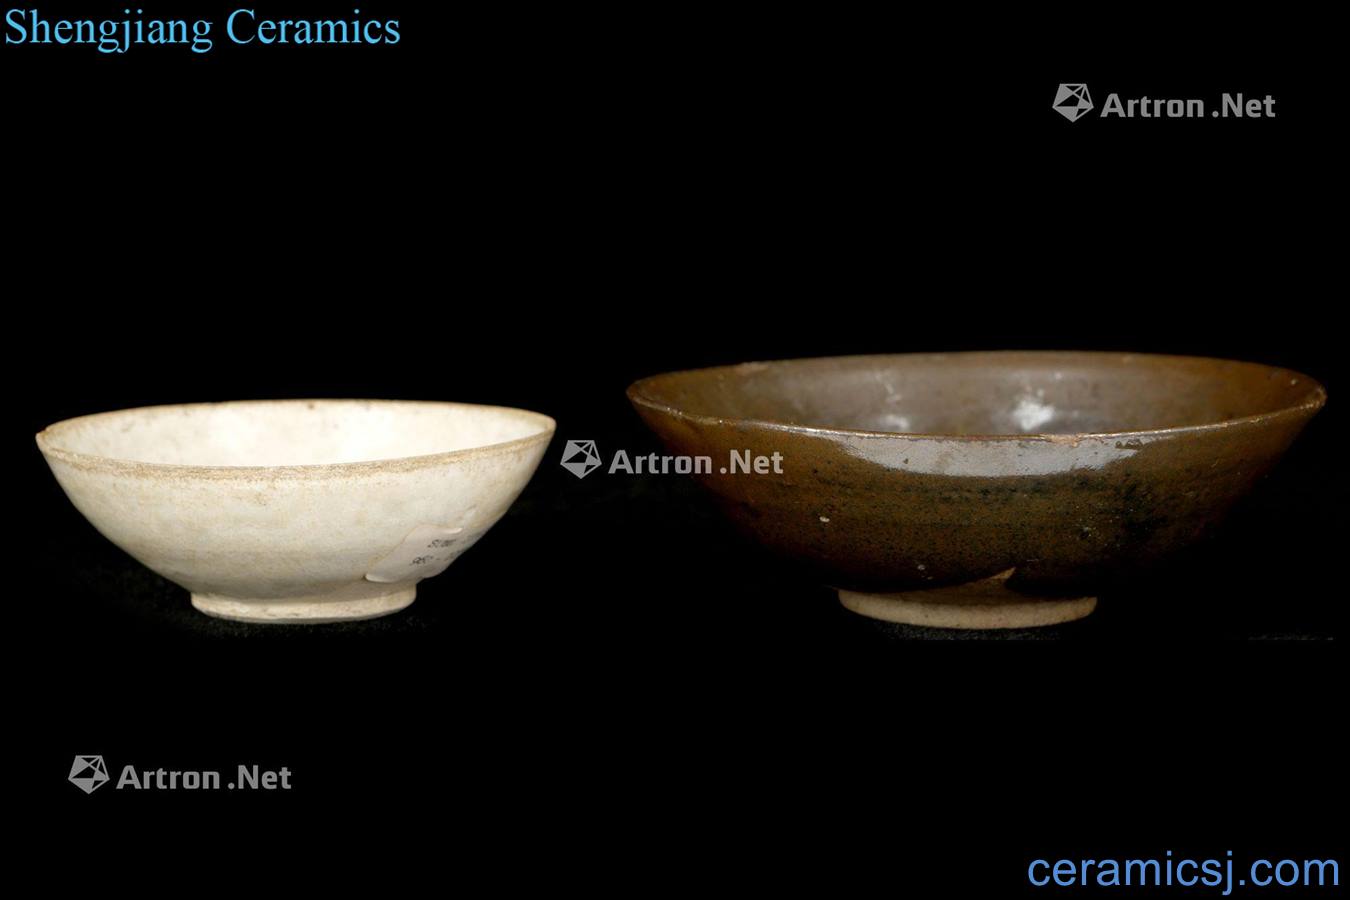 The song dynasty White glazed brown glazed bowl of each one